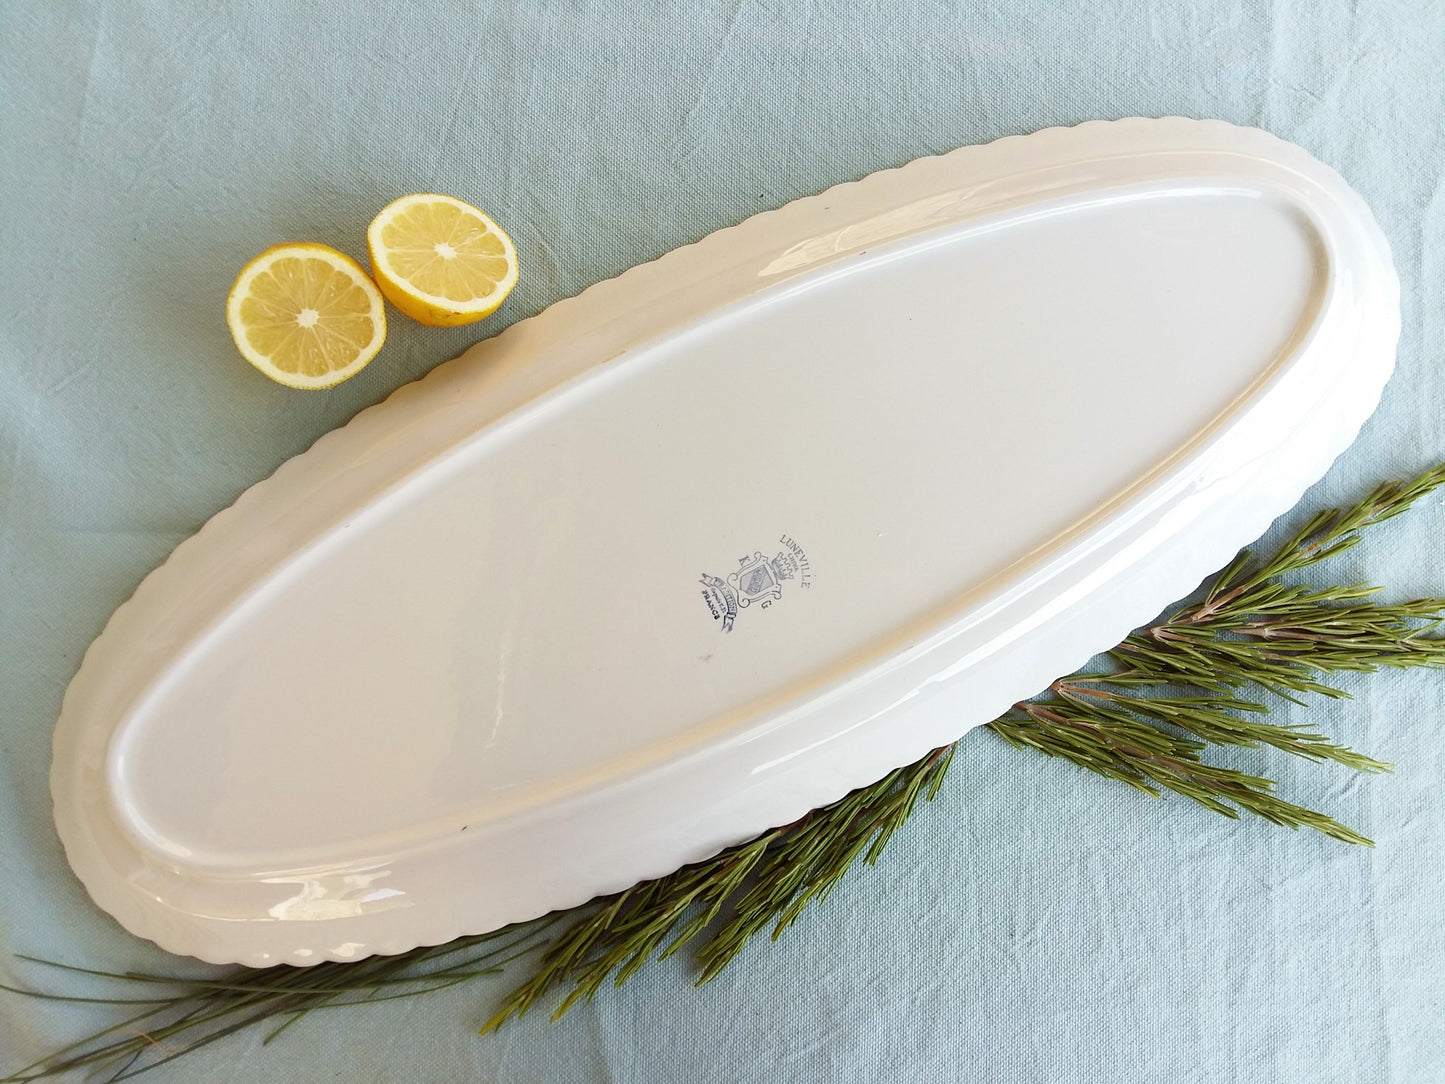 Extra Long, French, Porcelain, "Lunéville" Fish Platter With Gilded Trim. from Tiggy & Pip - €160.00! Shop now at Tiggy and Pip